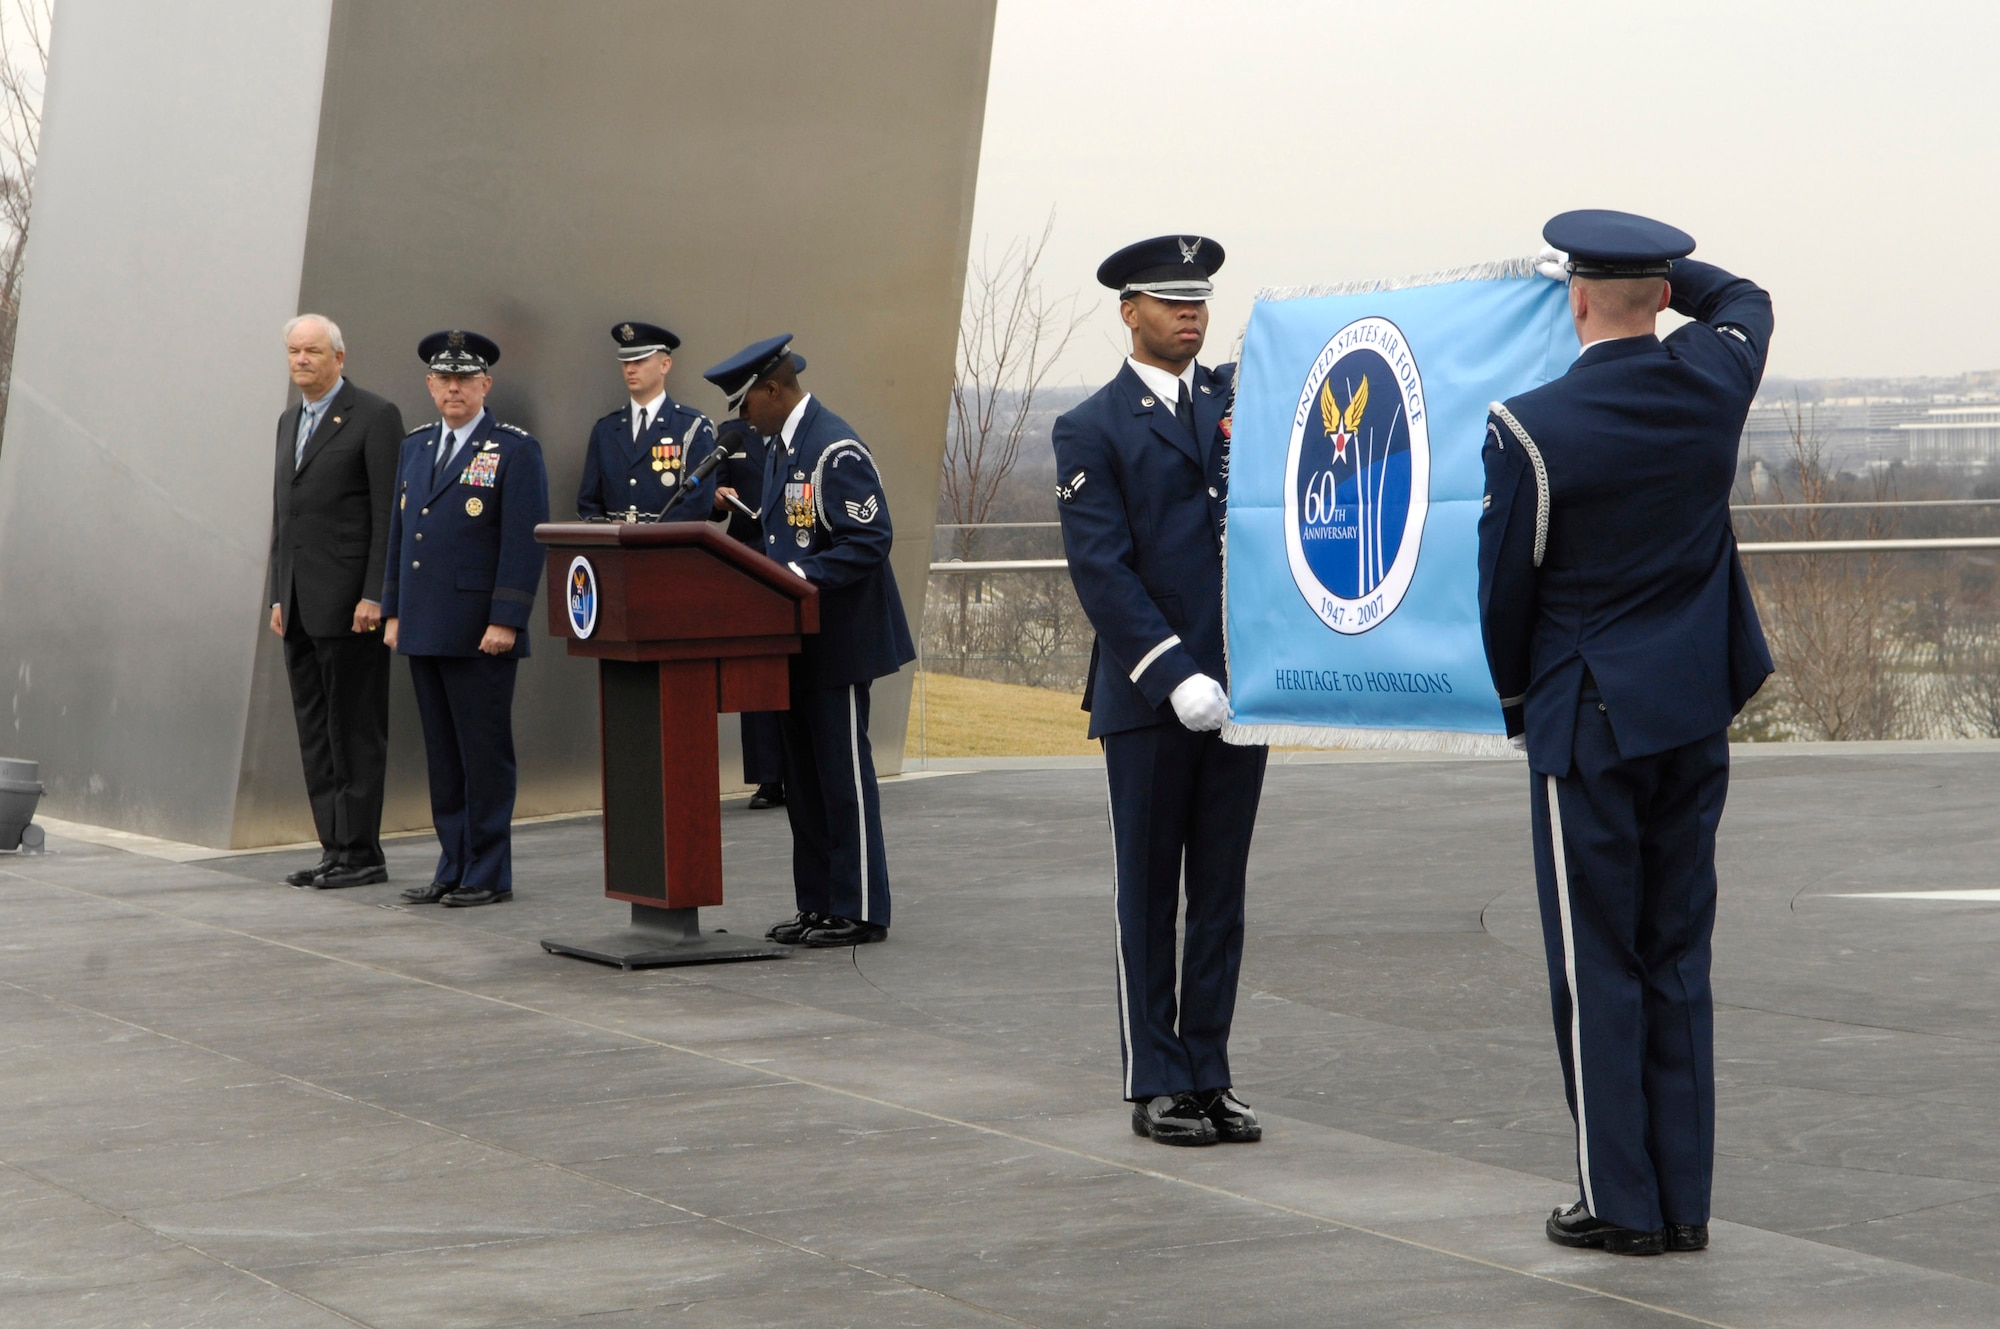 Secretary of the Air Force Michael W. Wynne and Air Force Chief of Staff Gen. T. Michael Moseley observe as Airmen from the U.S. Air Force Honor Guard display the Air Force's 60th Anniversary flag during a ceremony at the Air Force Memorial March 1 in Arlington, Va. The flag will fly at the memorial until the Air Force's 60th birthday Sept. 18.  (U.S. Air Force photo/Senior Airman Daniel R. DeCook)